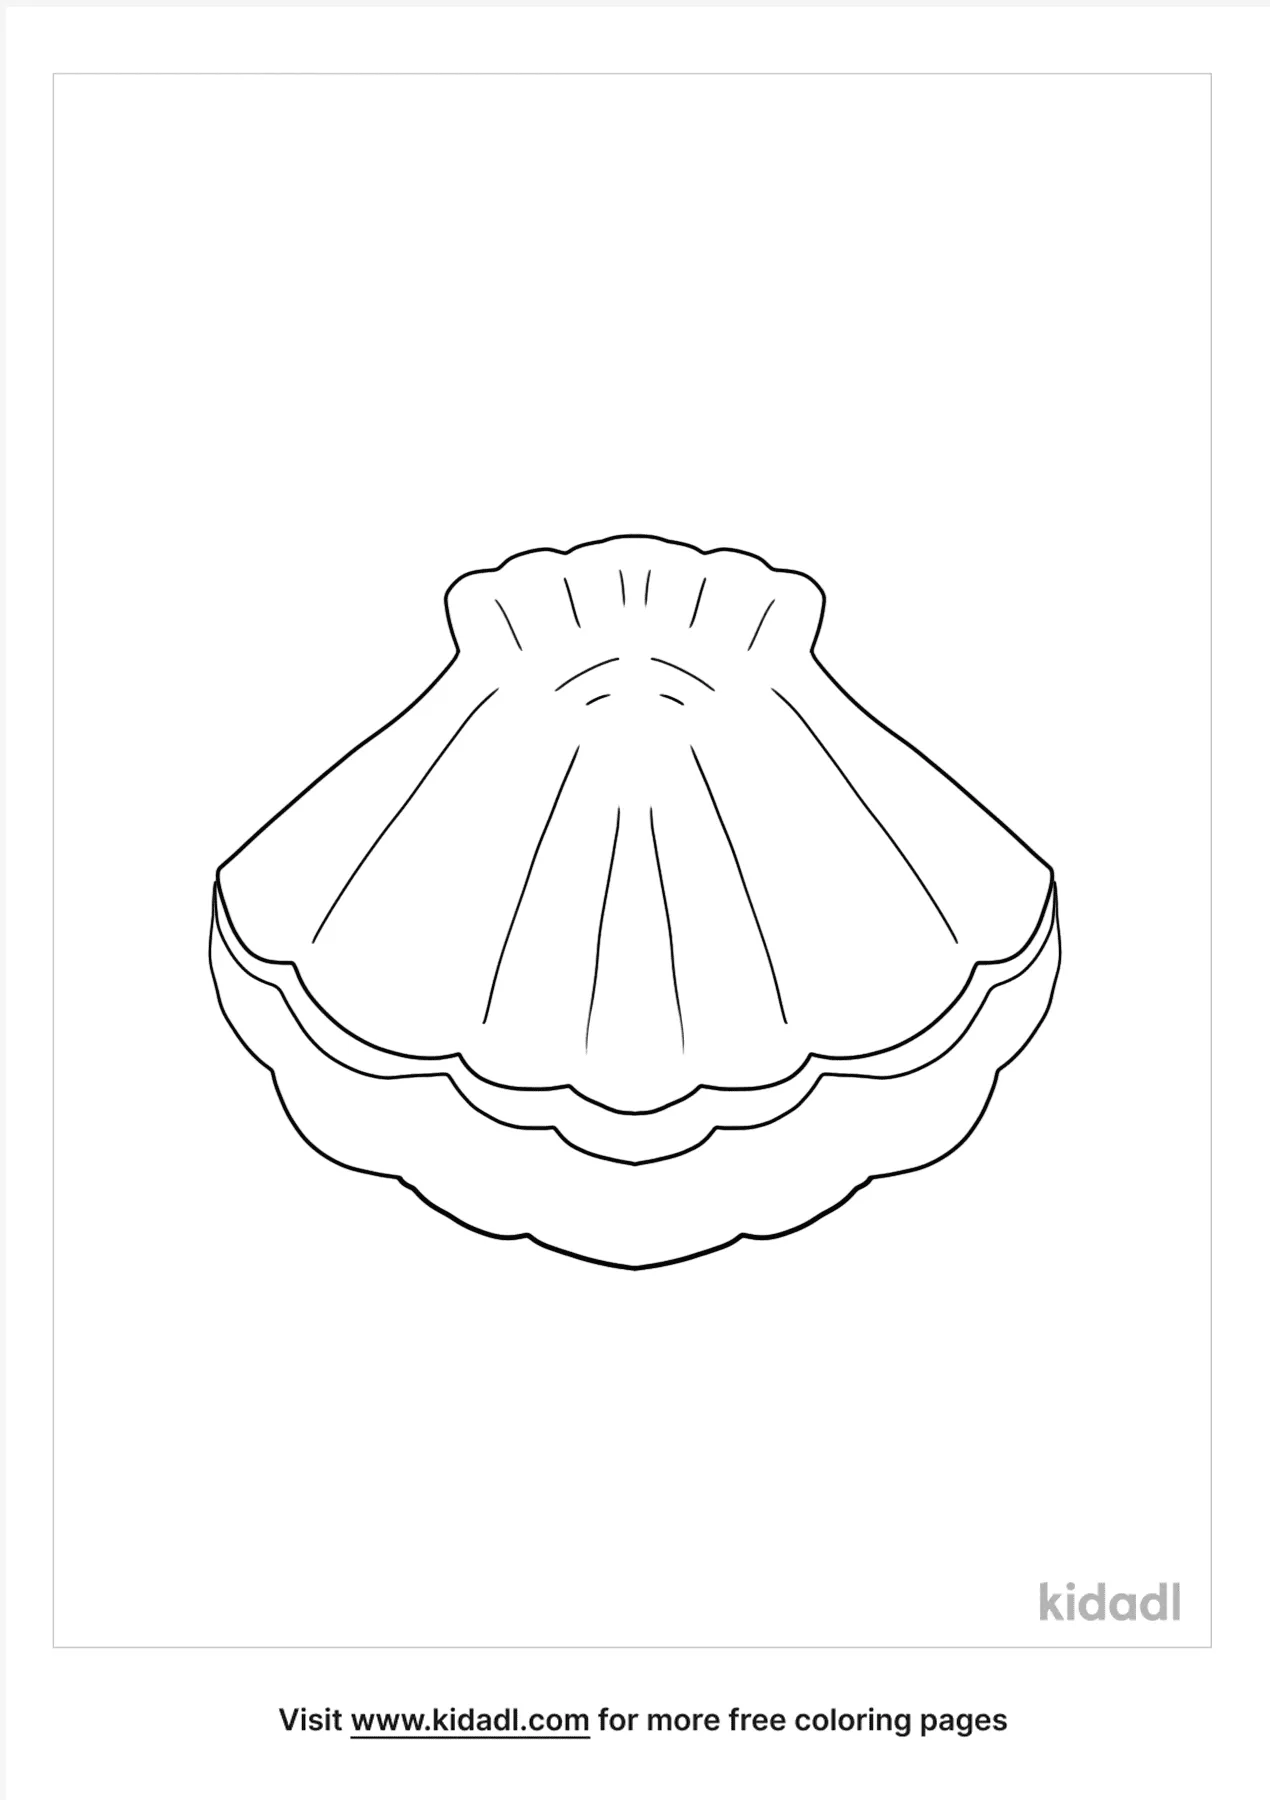 Clam Closed Coloring Page